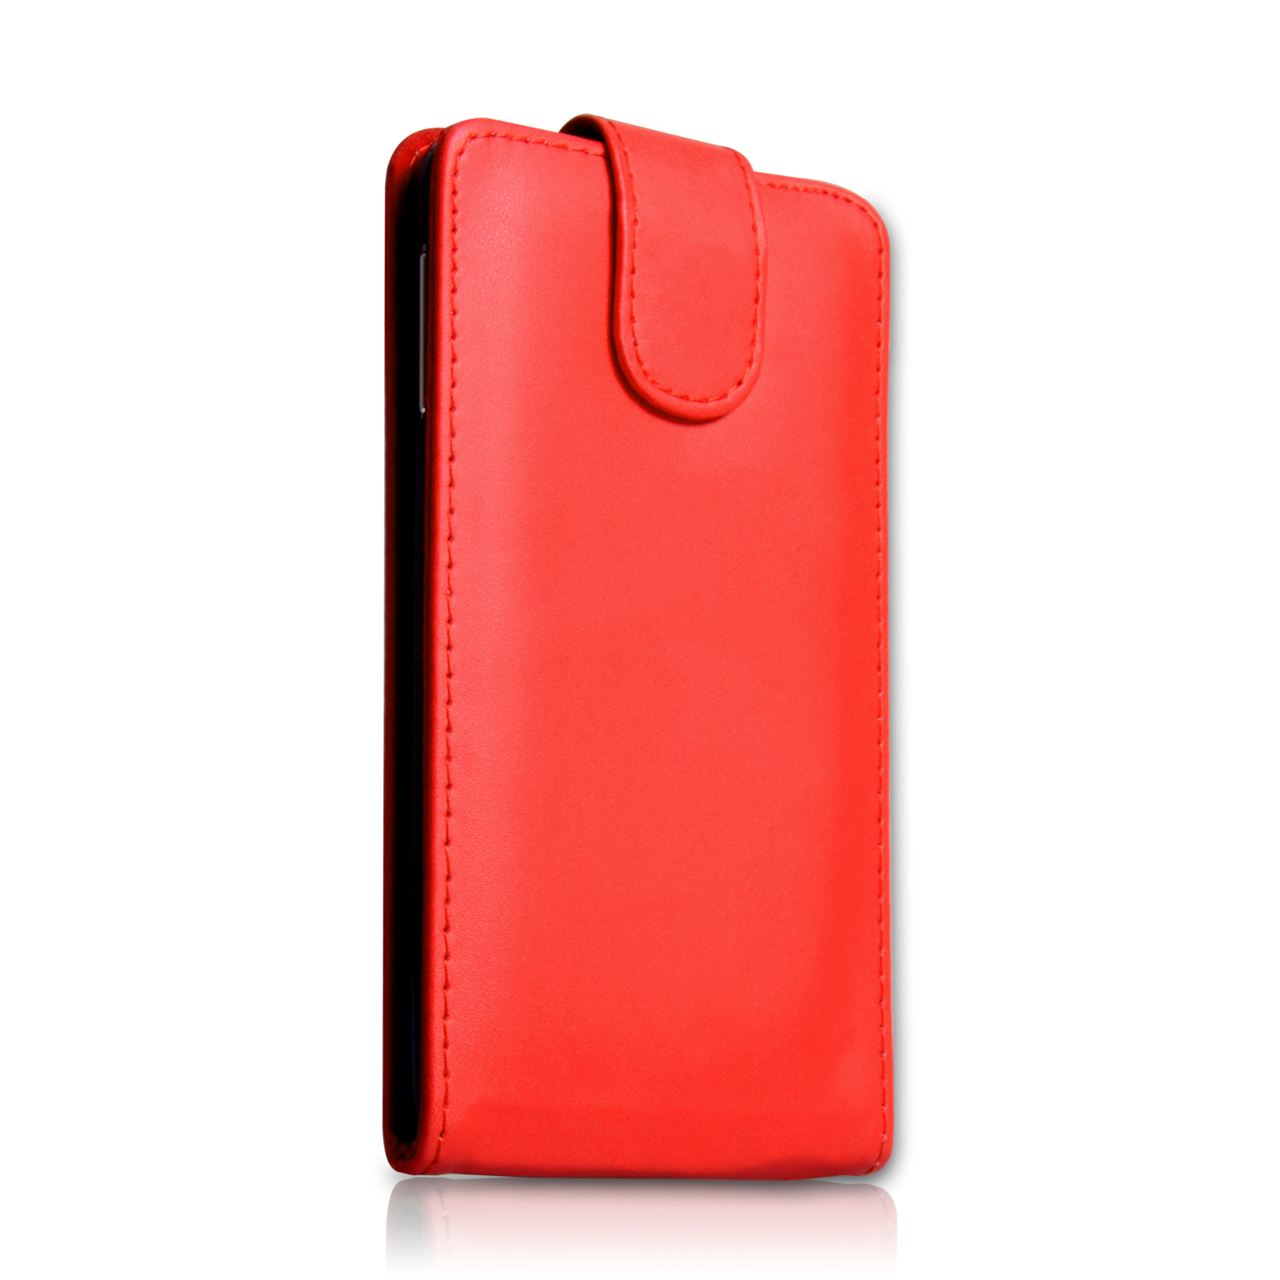 YouSave Samsung Galaxy Note 3 Leather Effect Flip Case - Red 